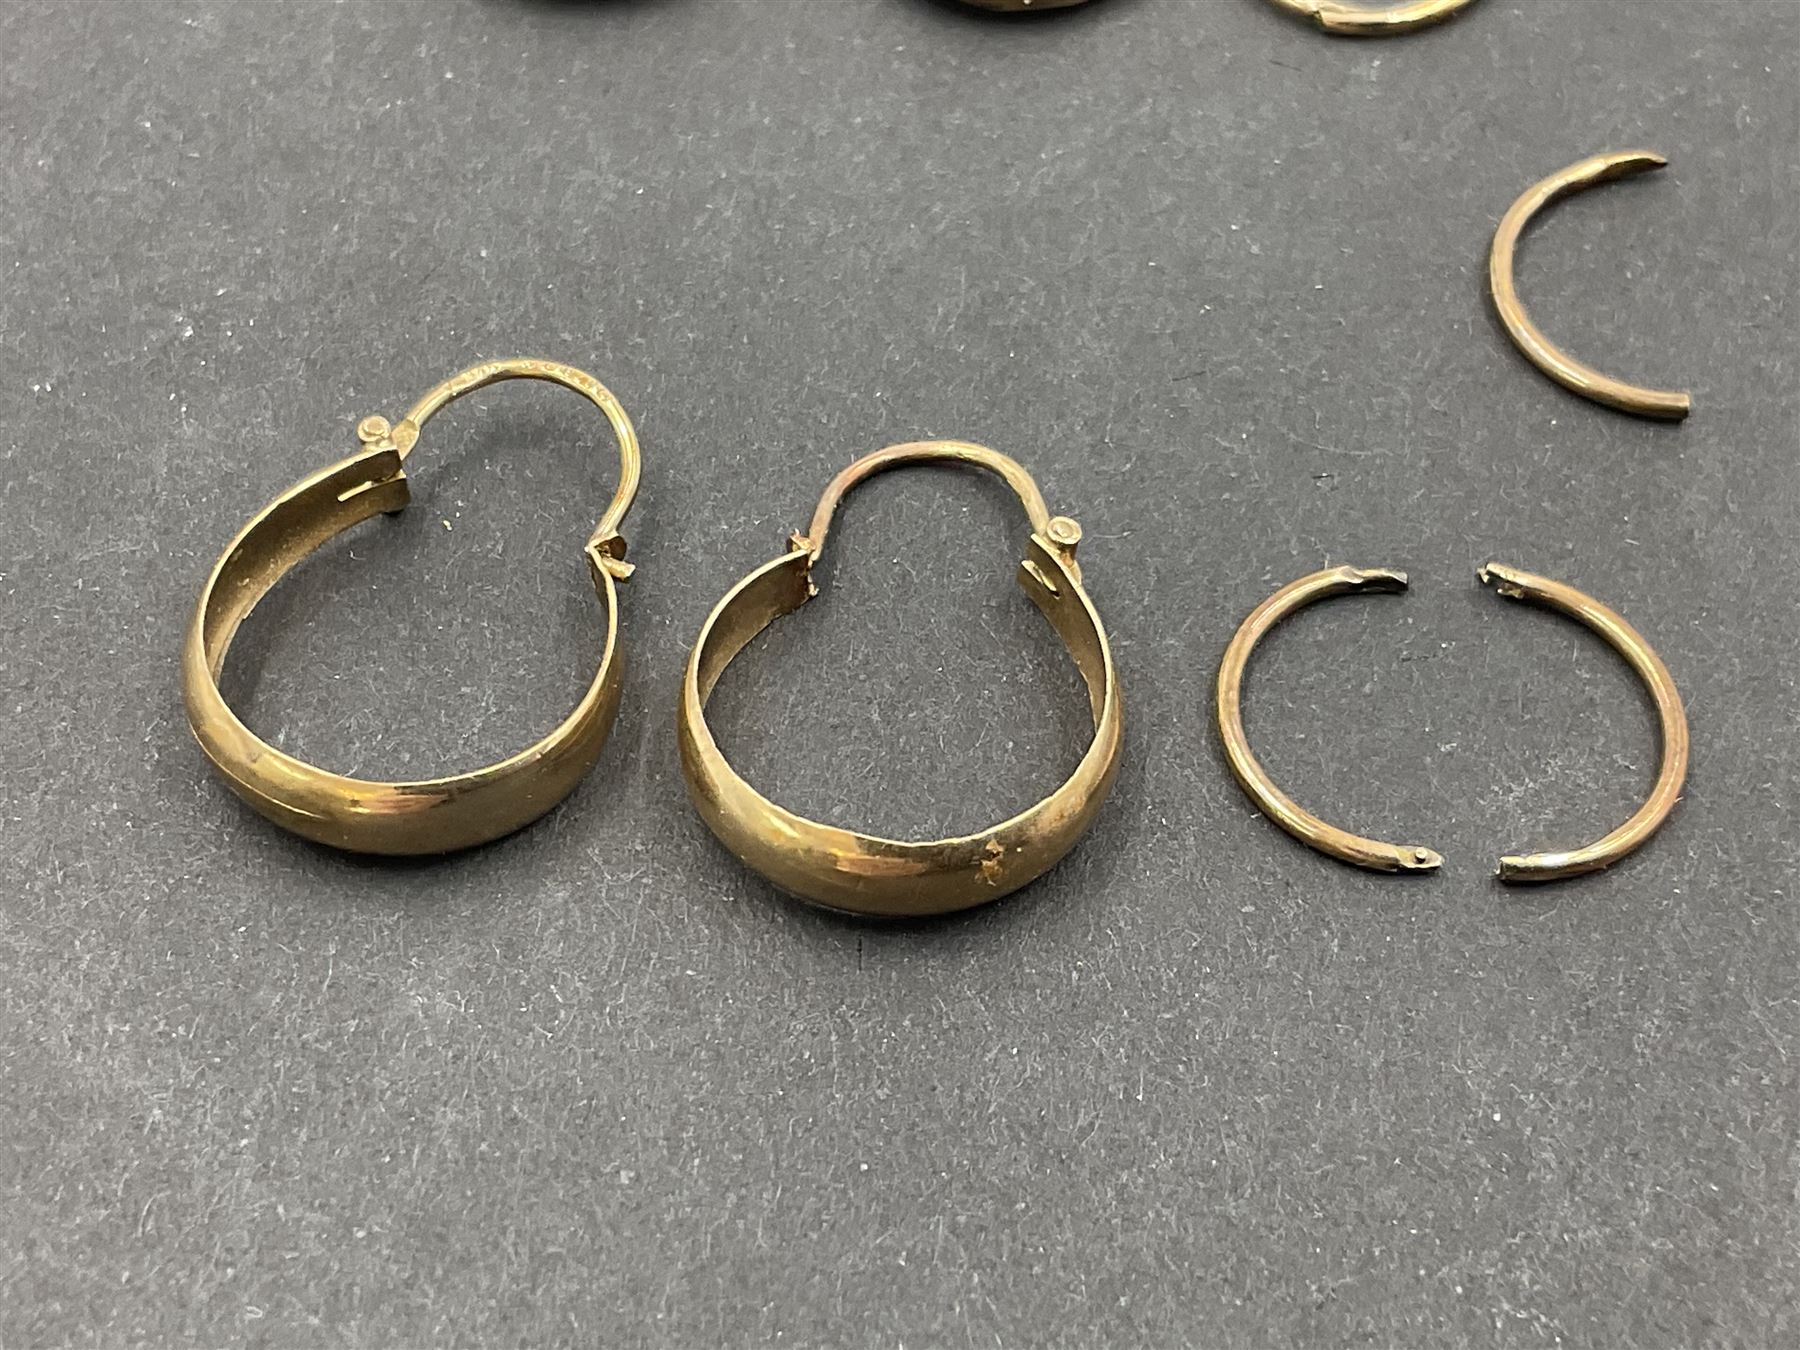 Two pairs of 9ct gold hoop earrings and 9ct gold earring oddments - Image 7 of 10